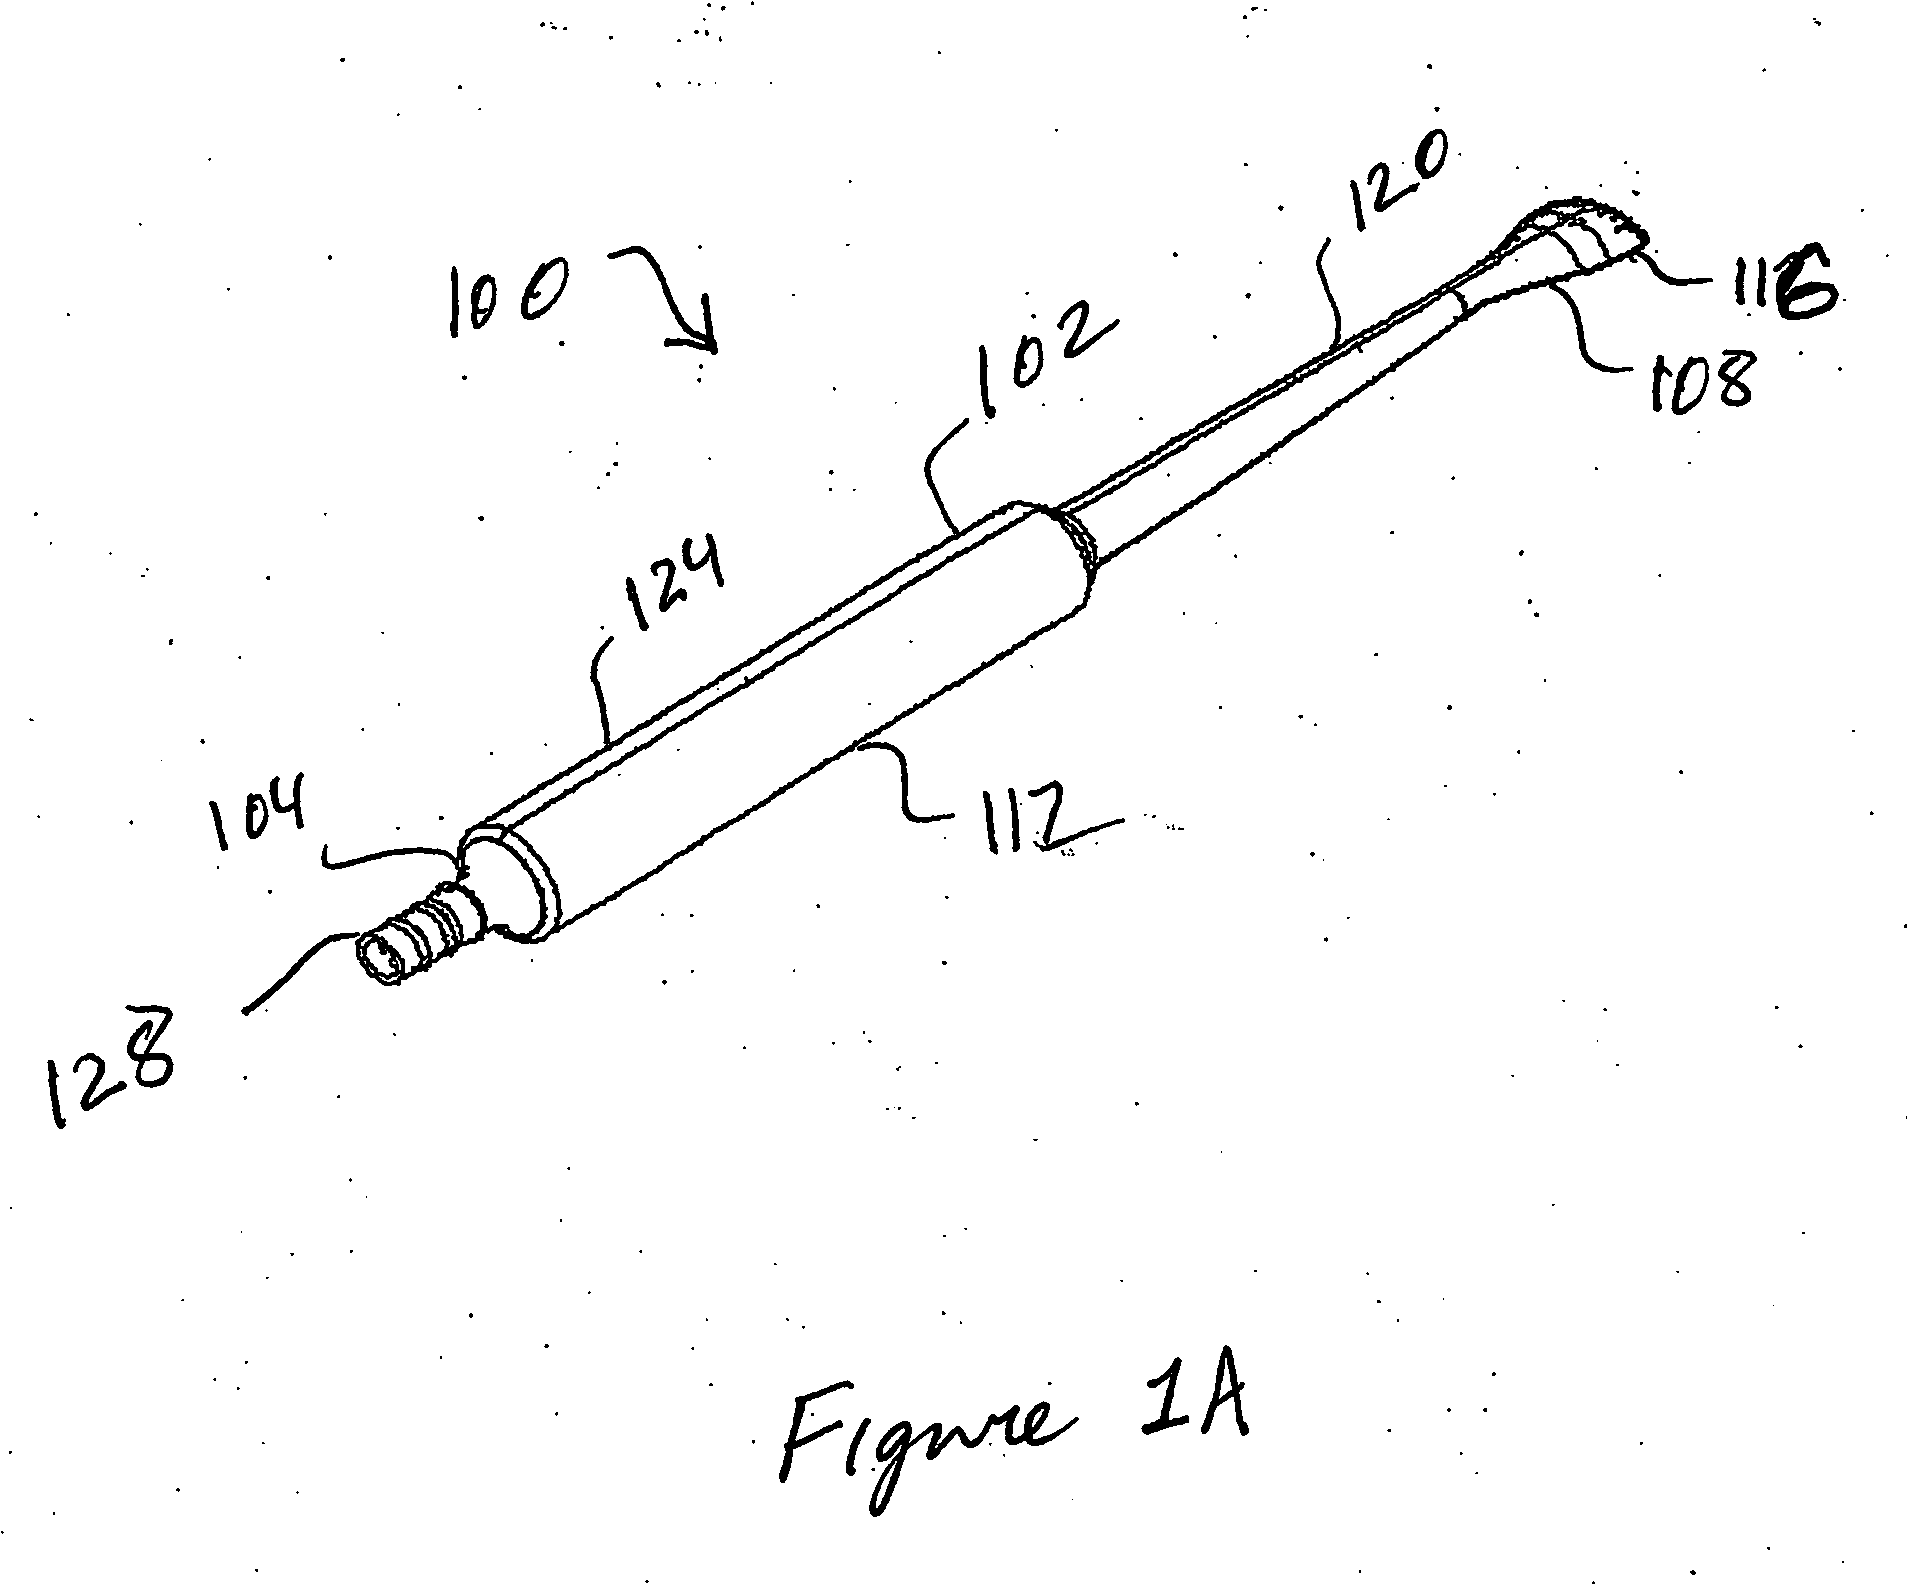 Suction retraction surgical instrument